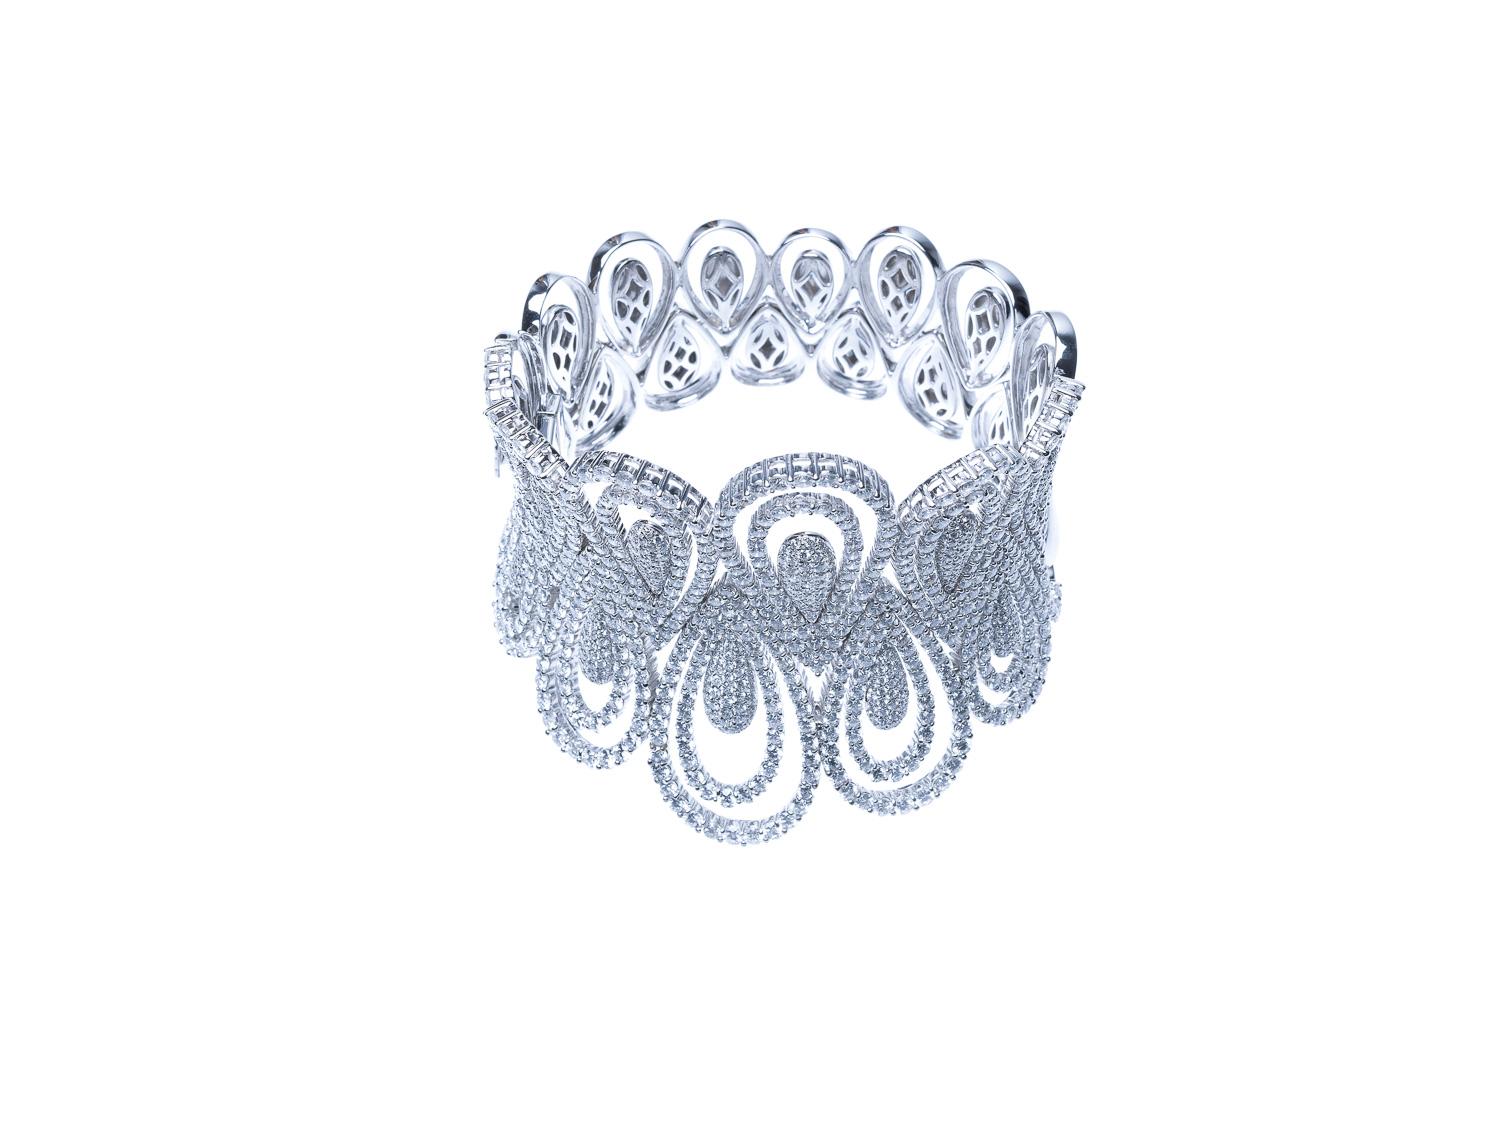 Bracelet with round brilliant diamonds, total weight 31.38ct, set in an 18karat white gold mounting, total weight 119.51 g